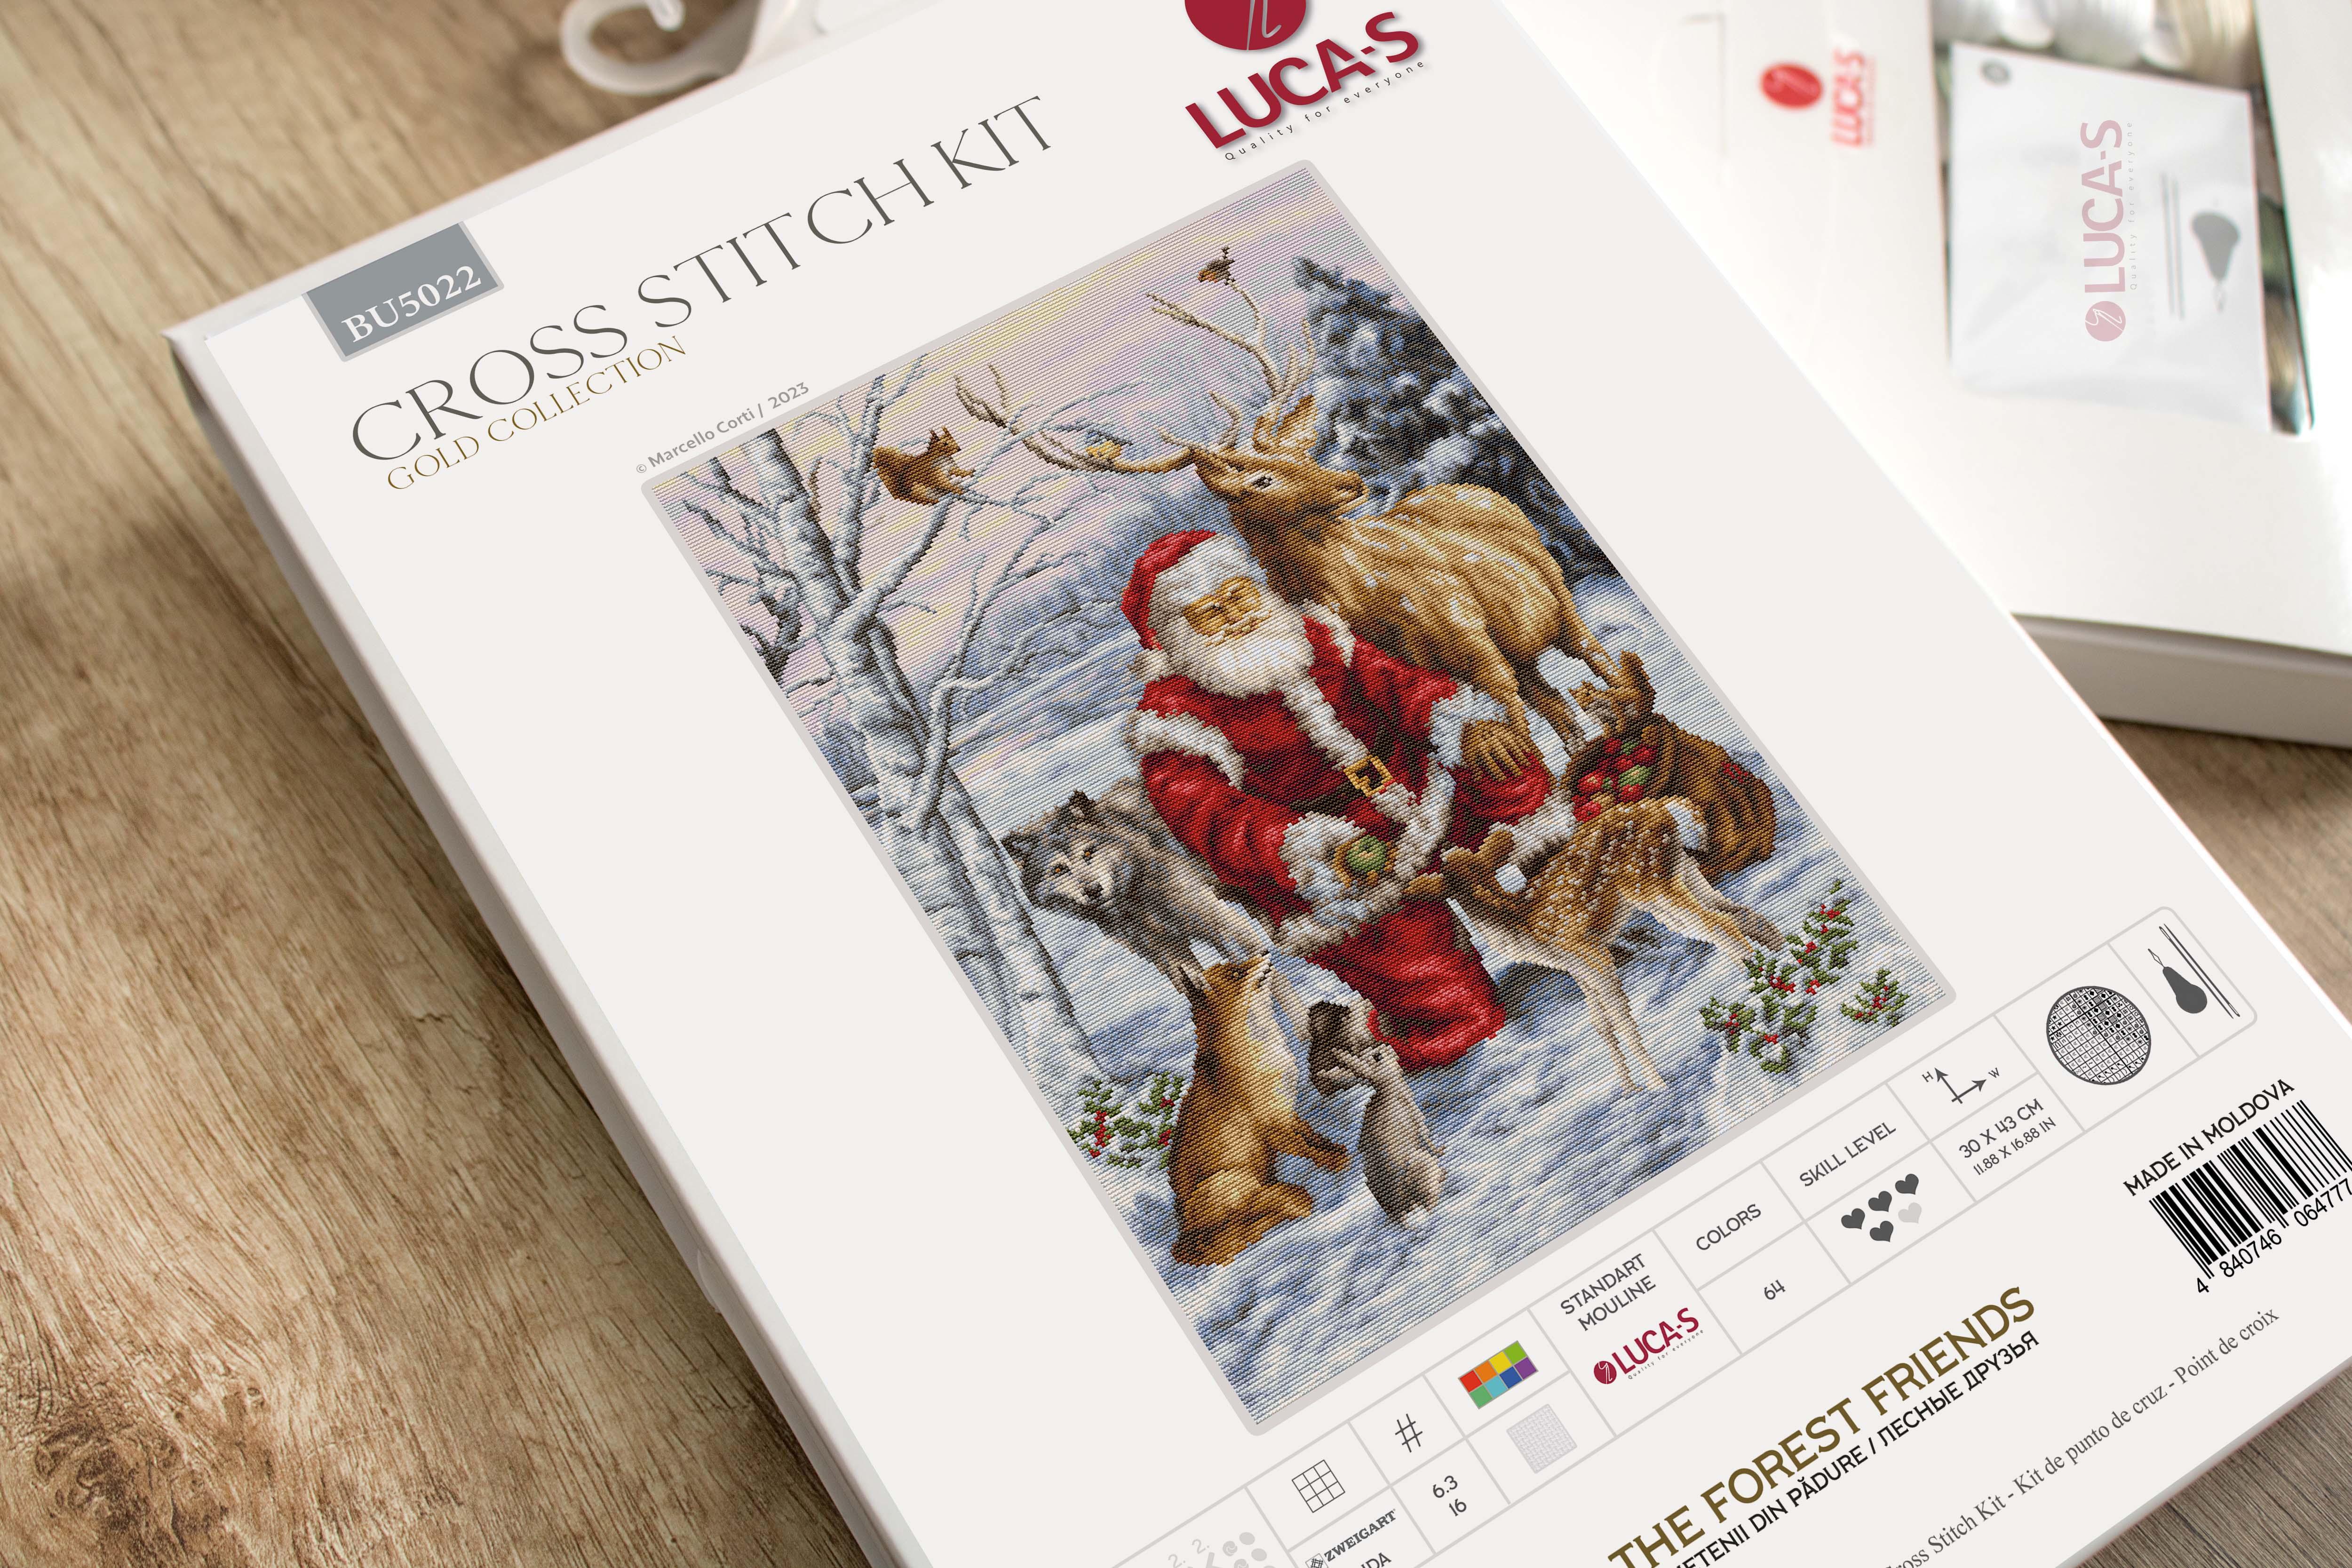 Cross Stitch Kit Luca-S GOLD - The Forest Friends, BU5022 - Luca-S Cross Stitch Kits